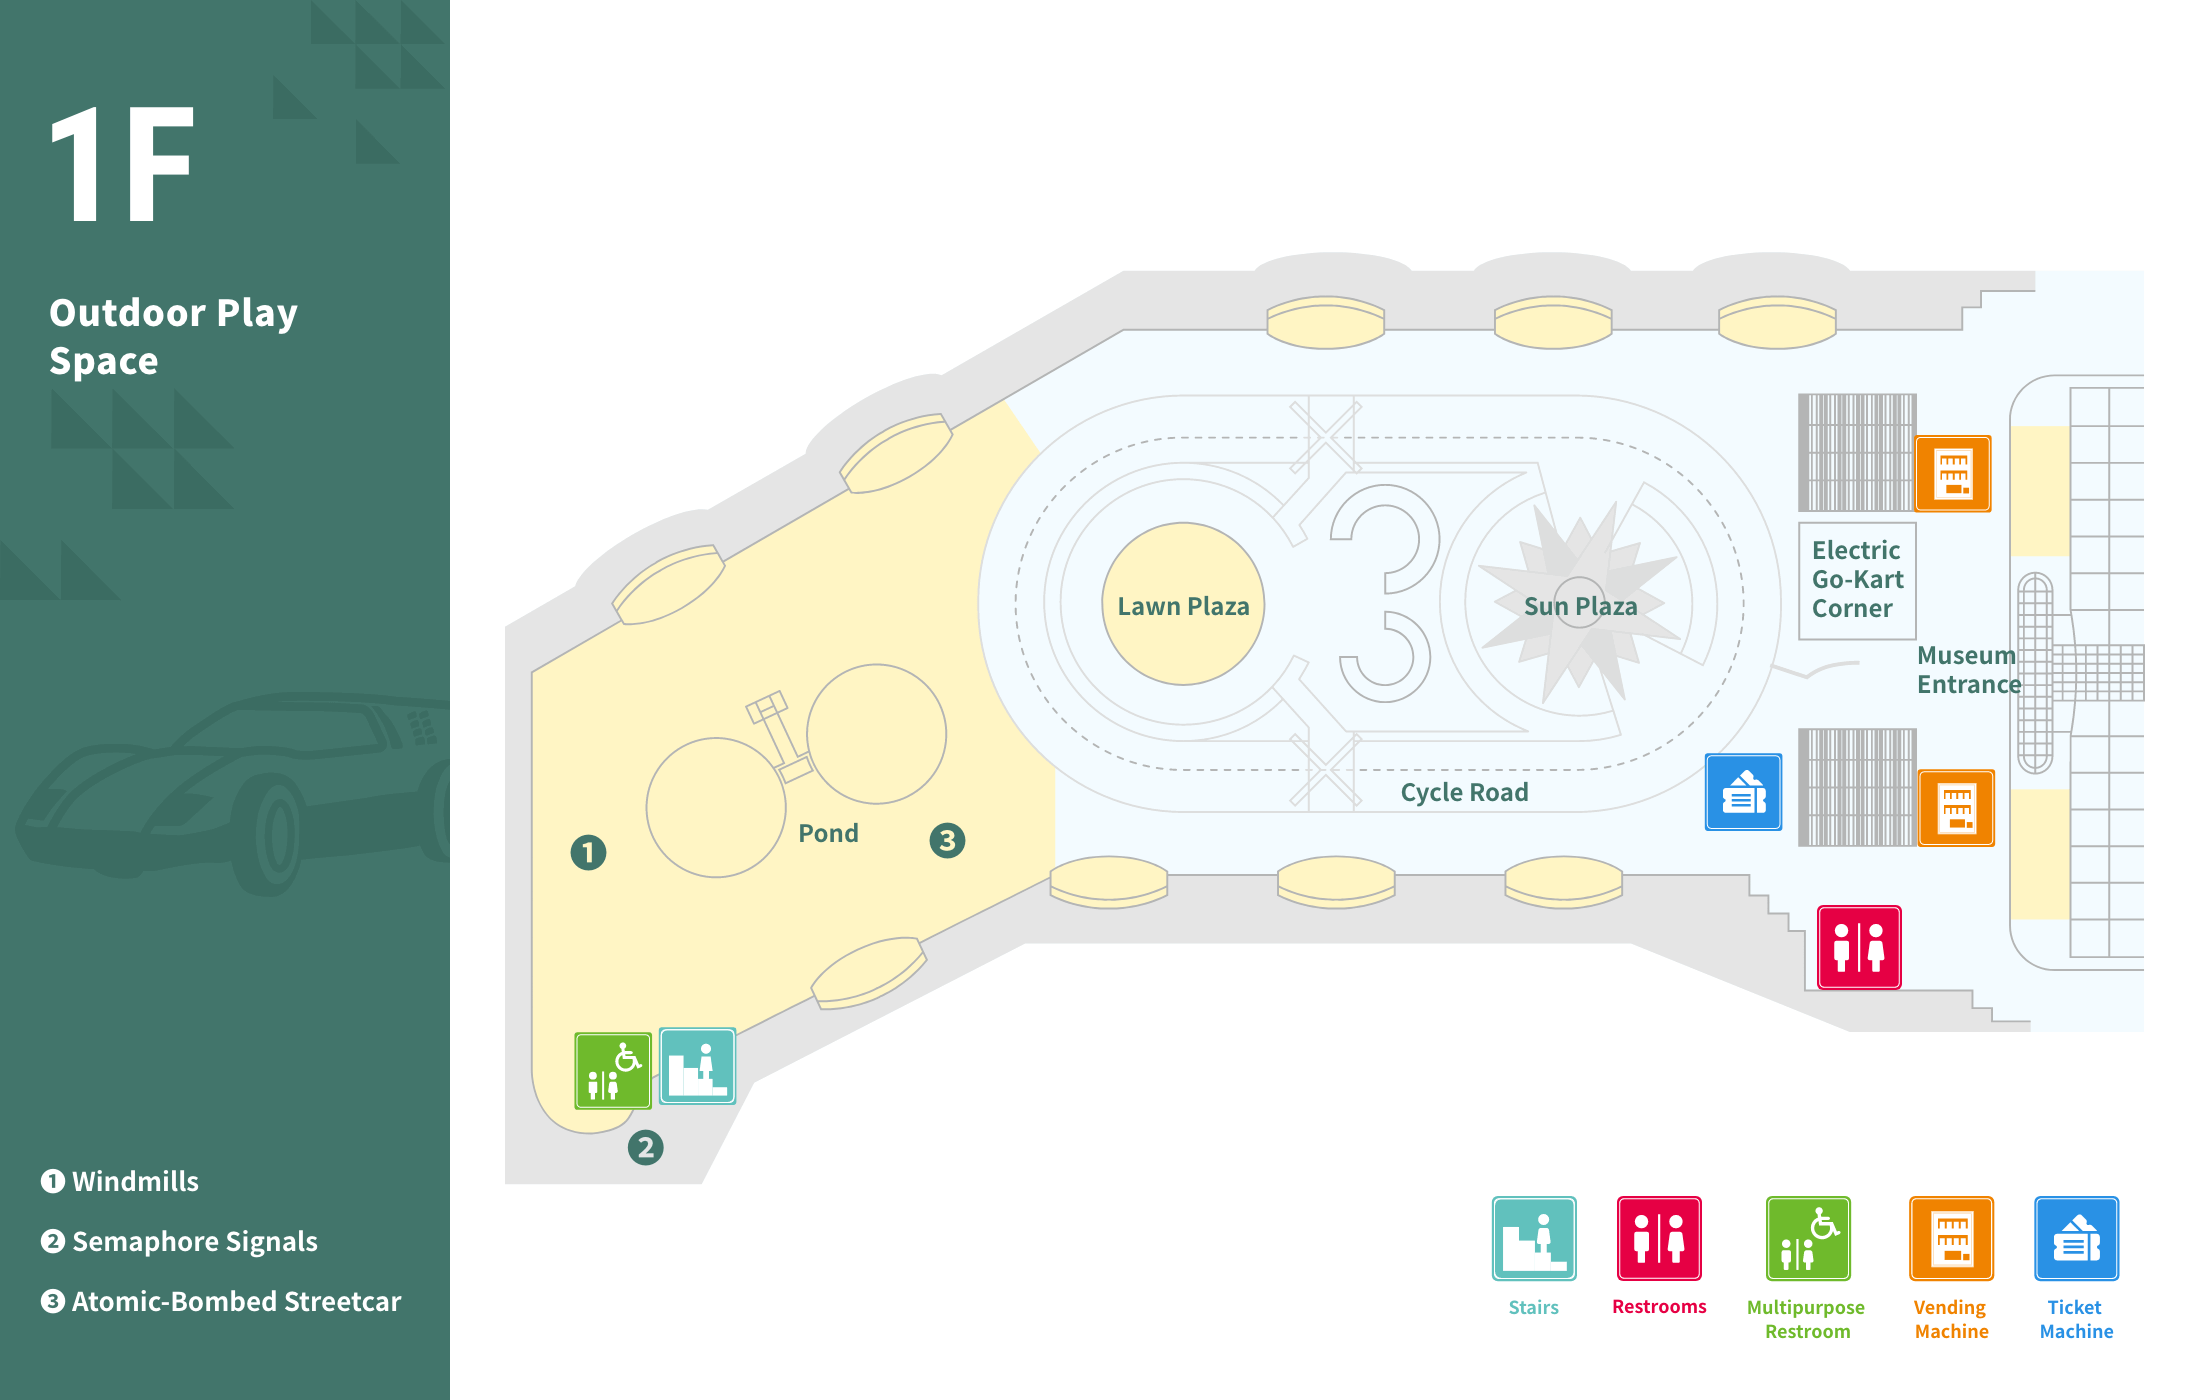 Outdoor Play Space Map (PDF) 